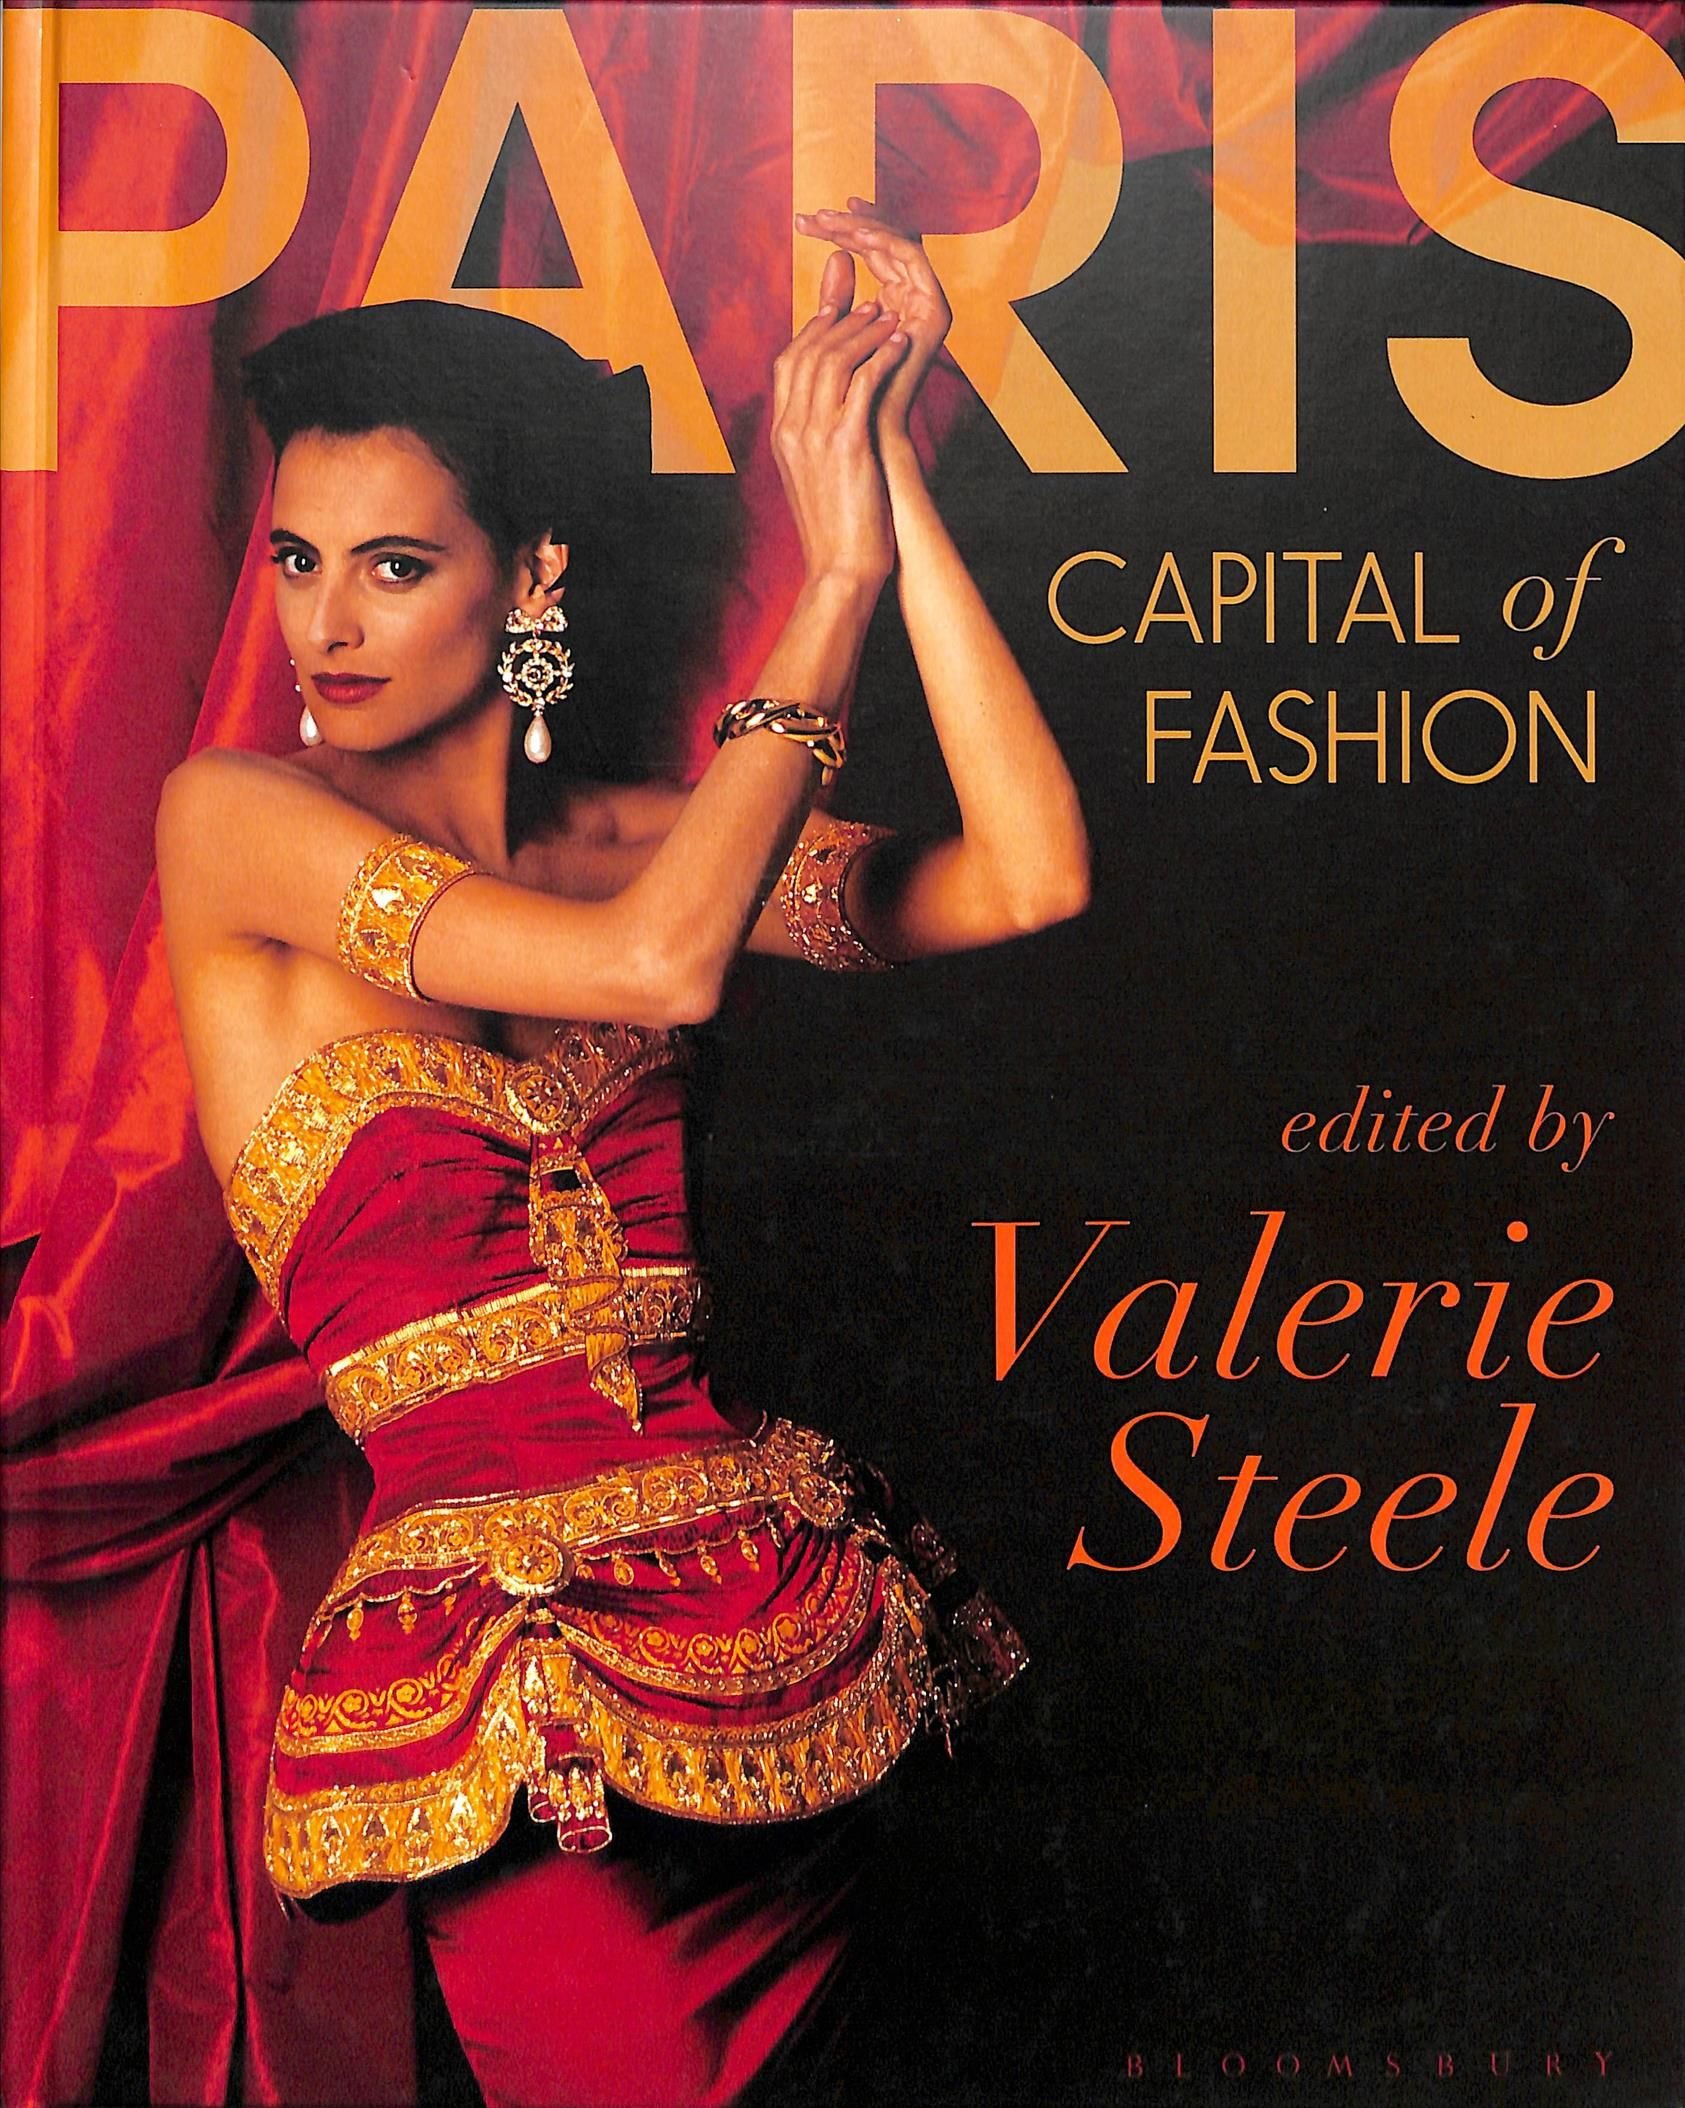 The Corset by Valerie Steele